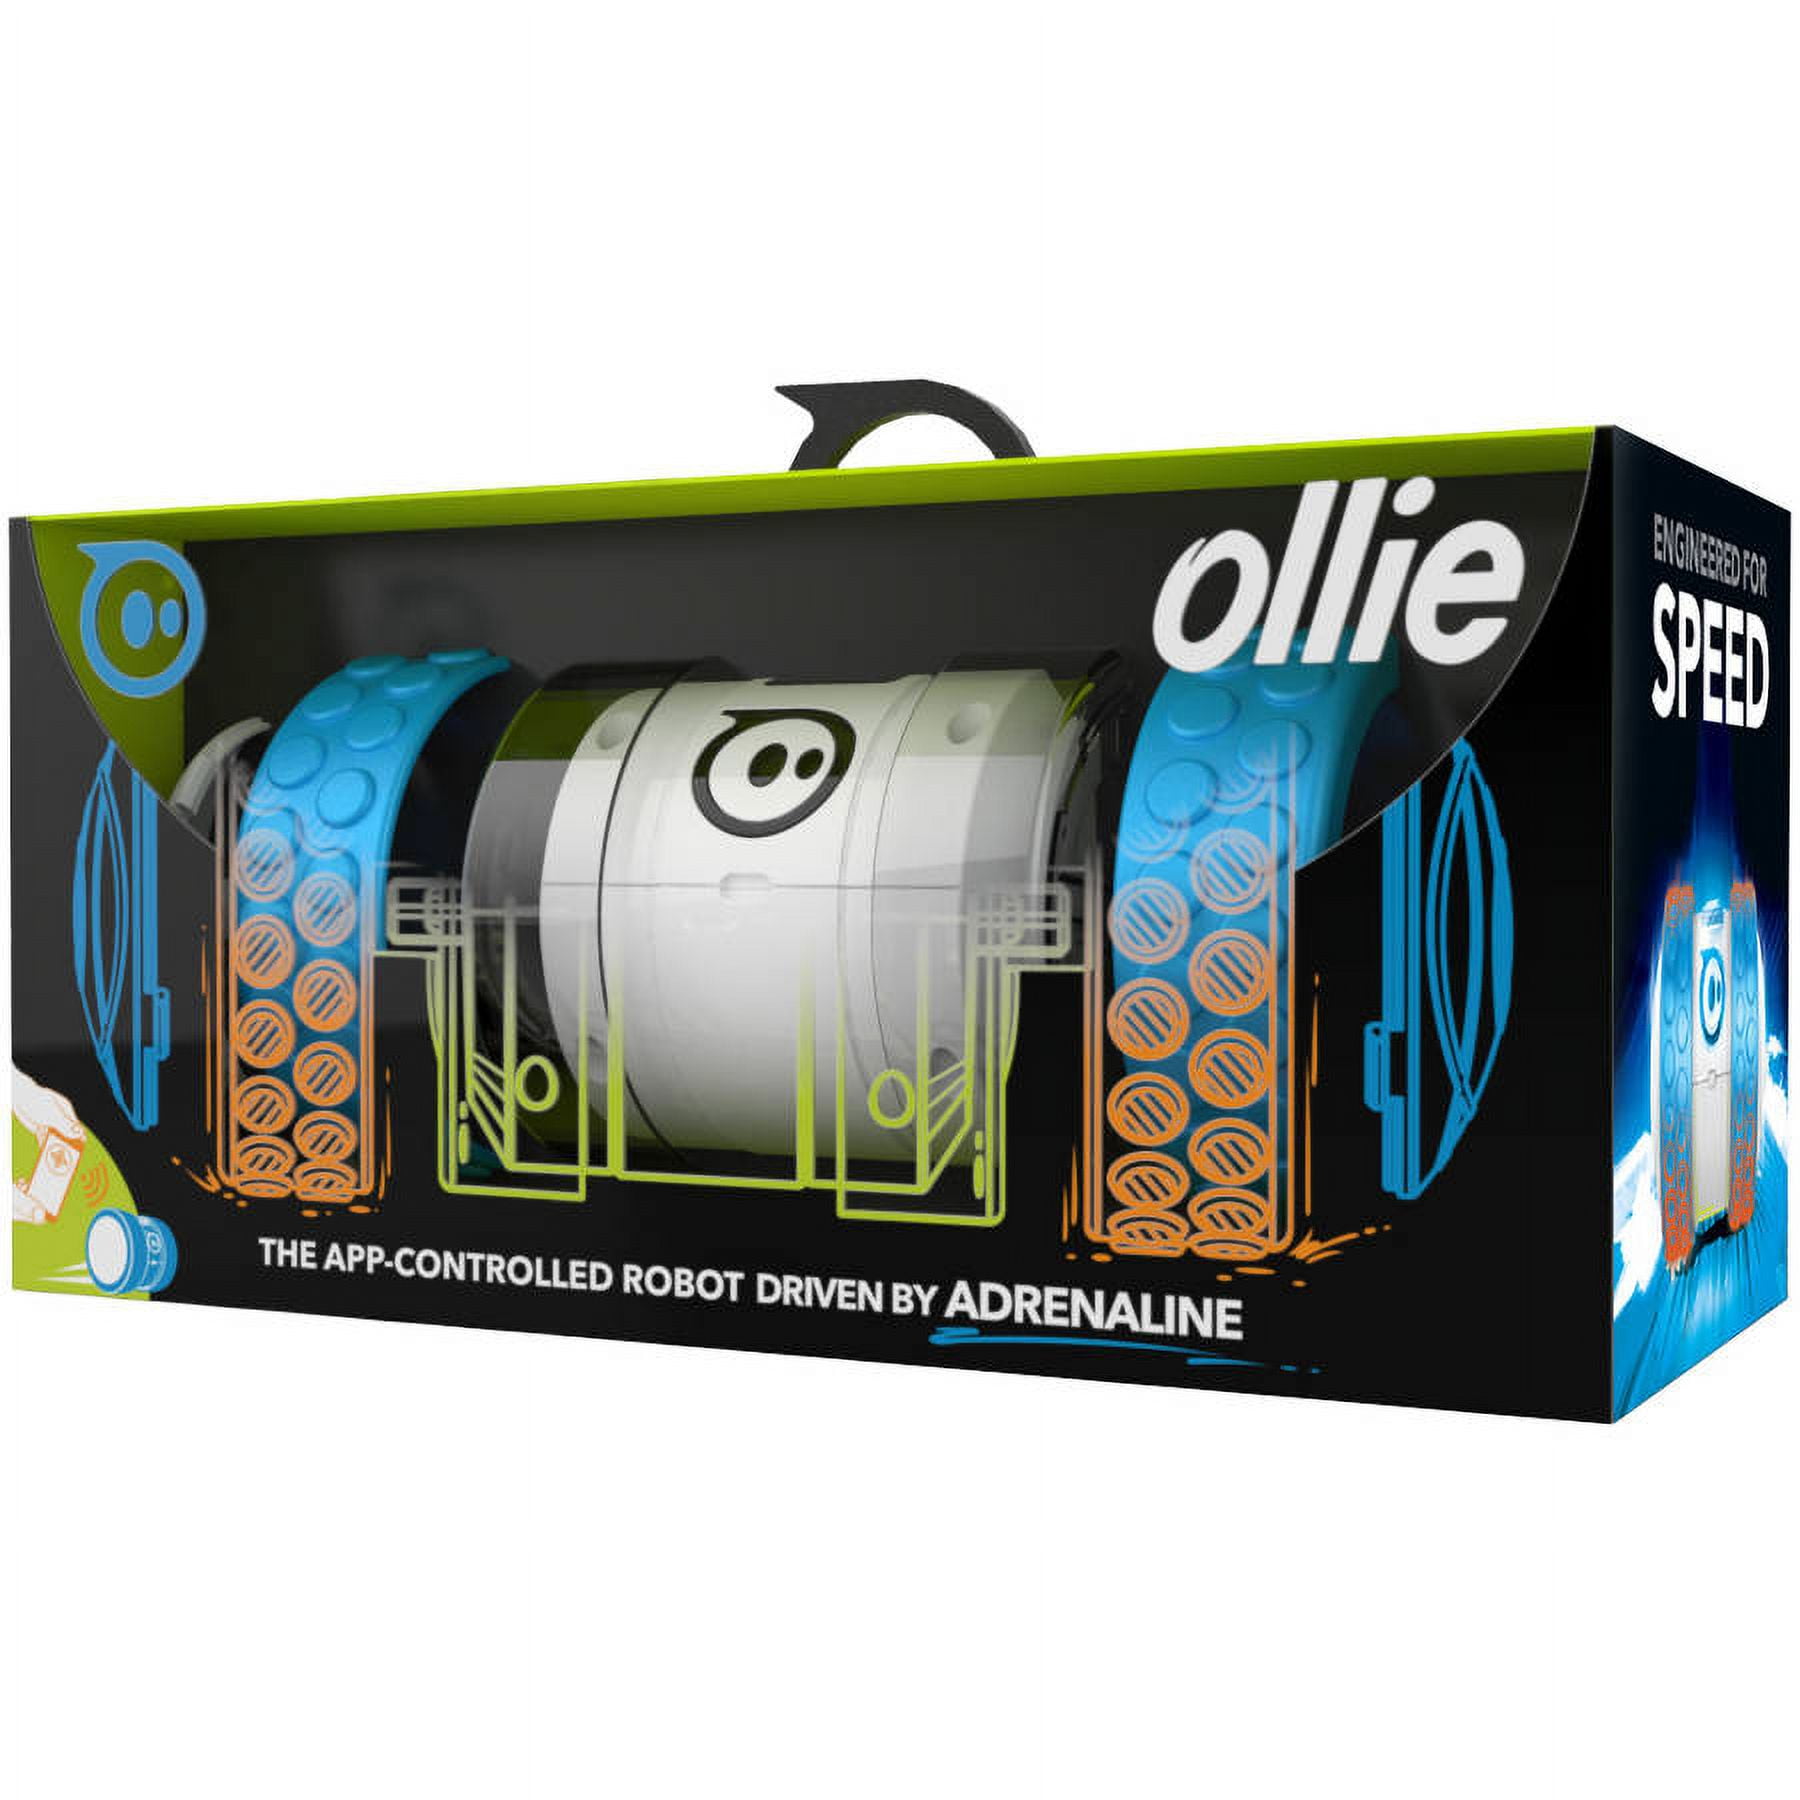 Sphero Ollie review: the remote control car reimagined